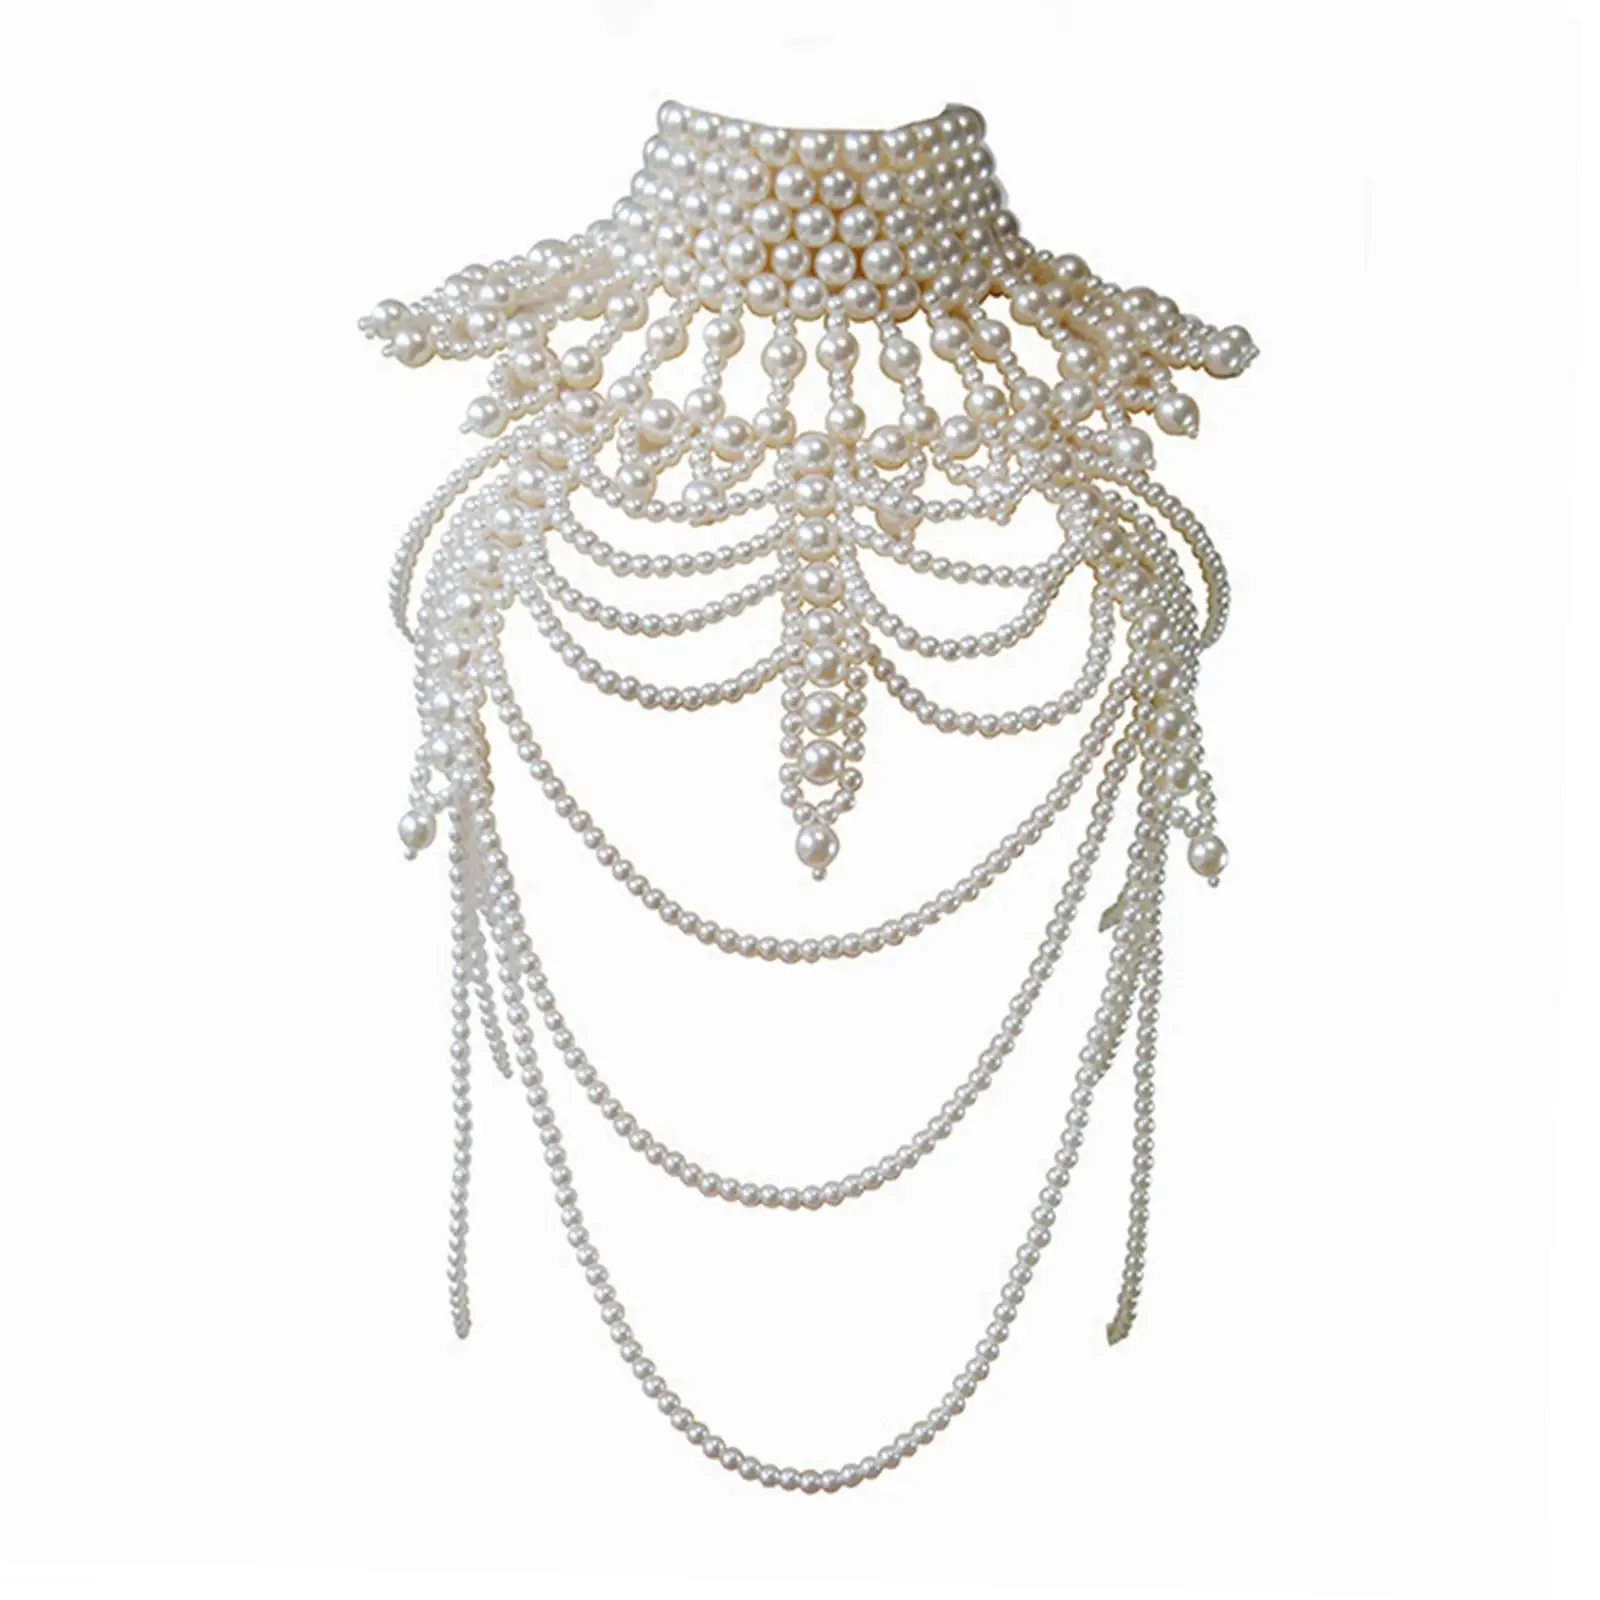 Layered Body Chain Tassels Necklace Delicate Trendy Fashion Multilayer Beautiful Shoulder Chains for girls Costume Party